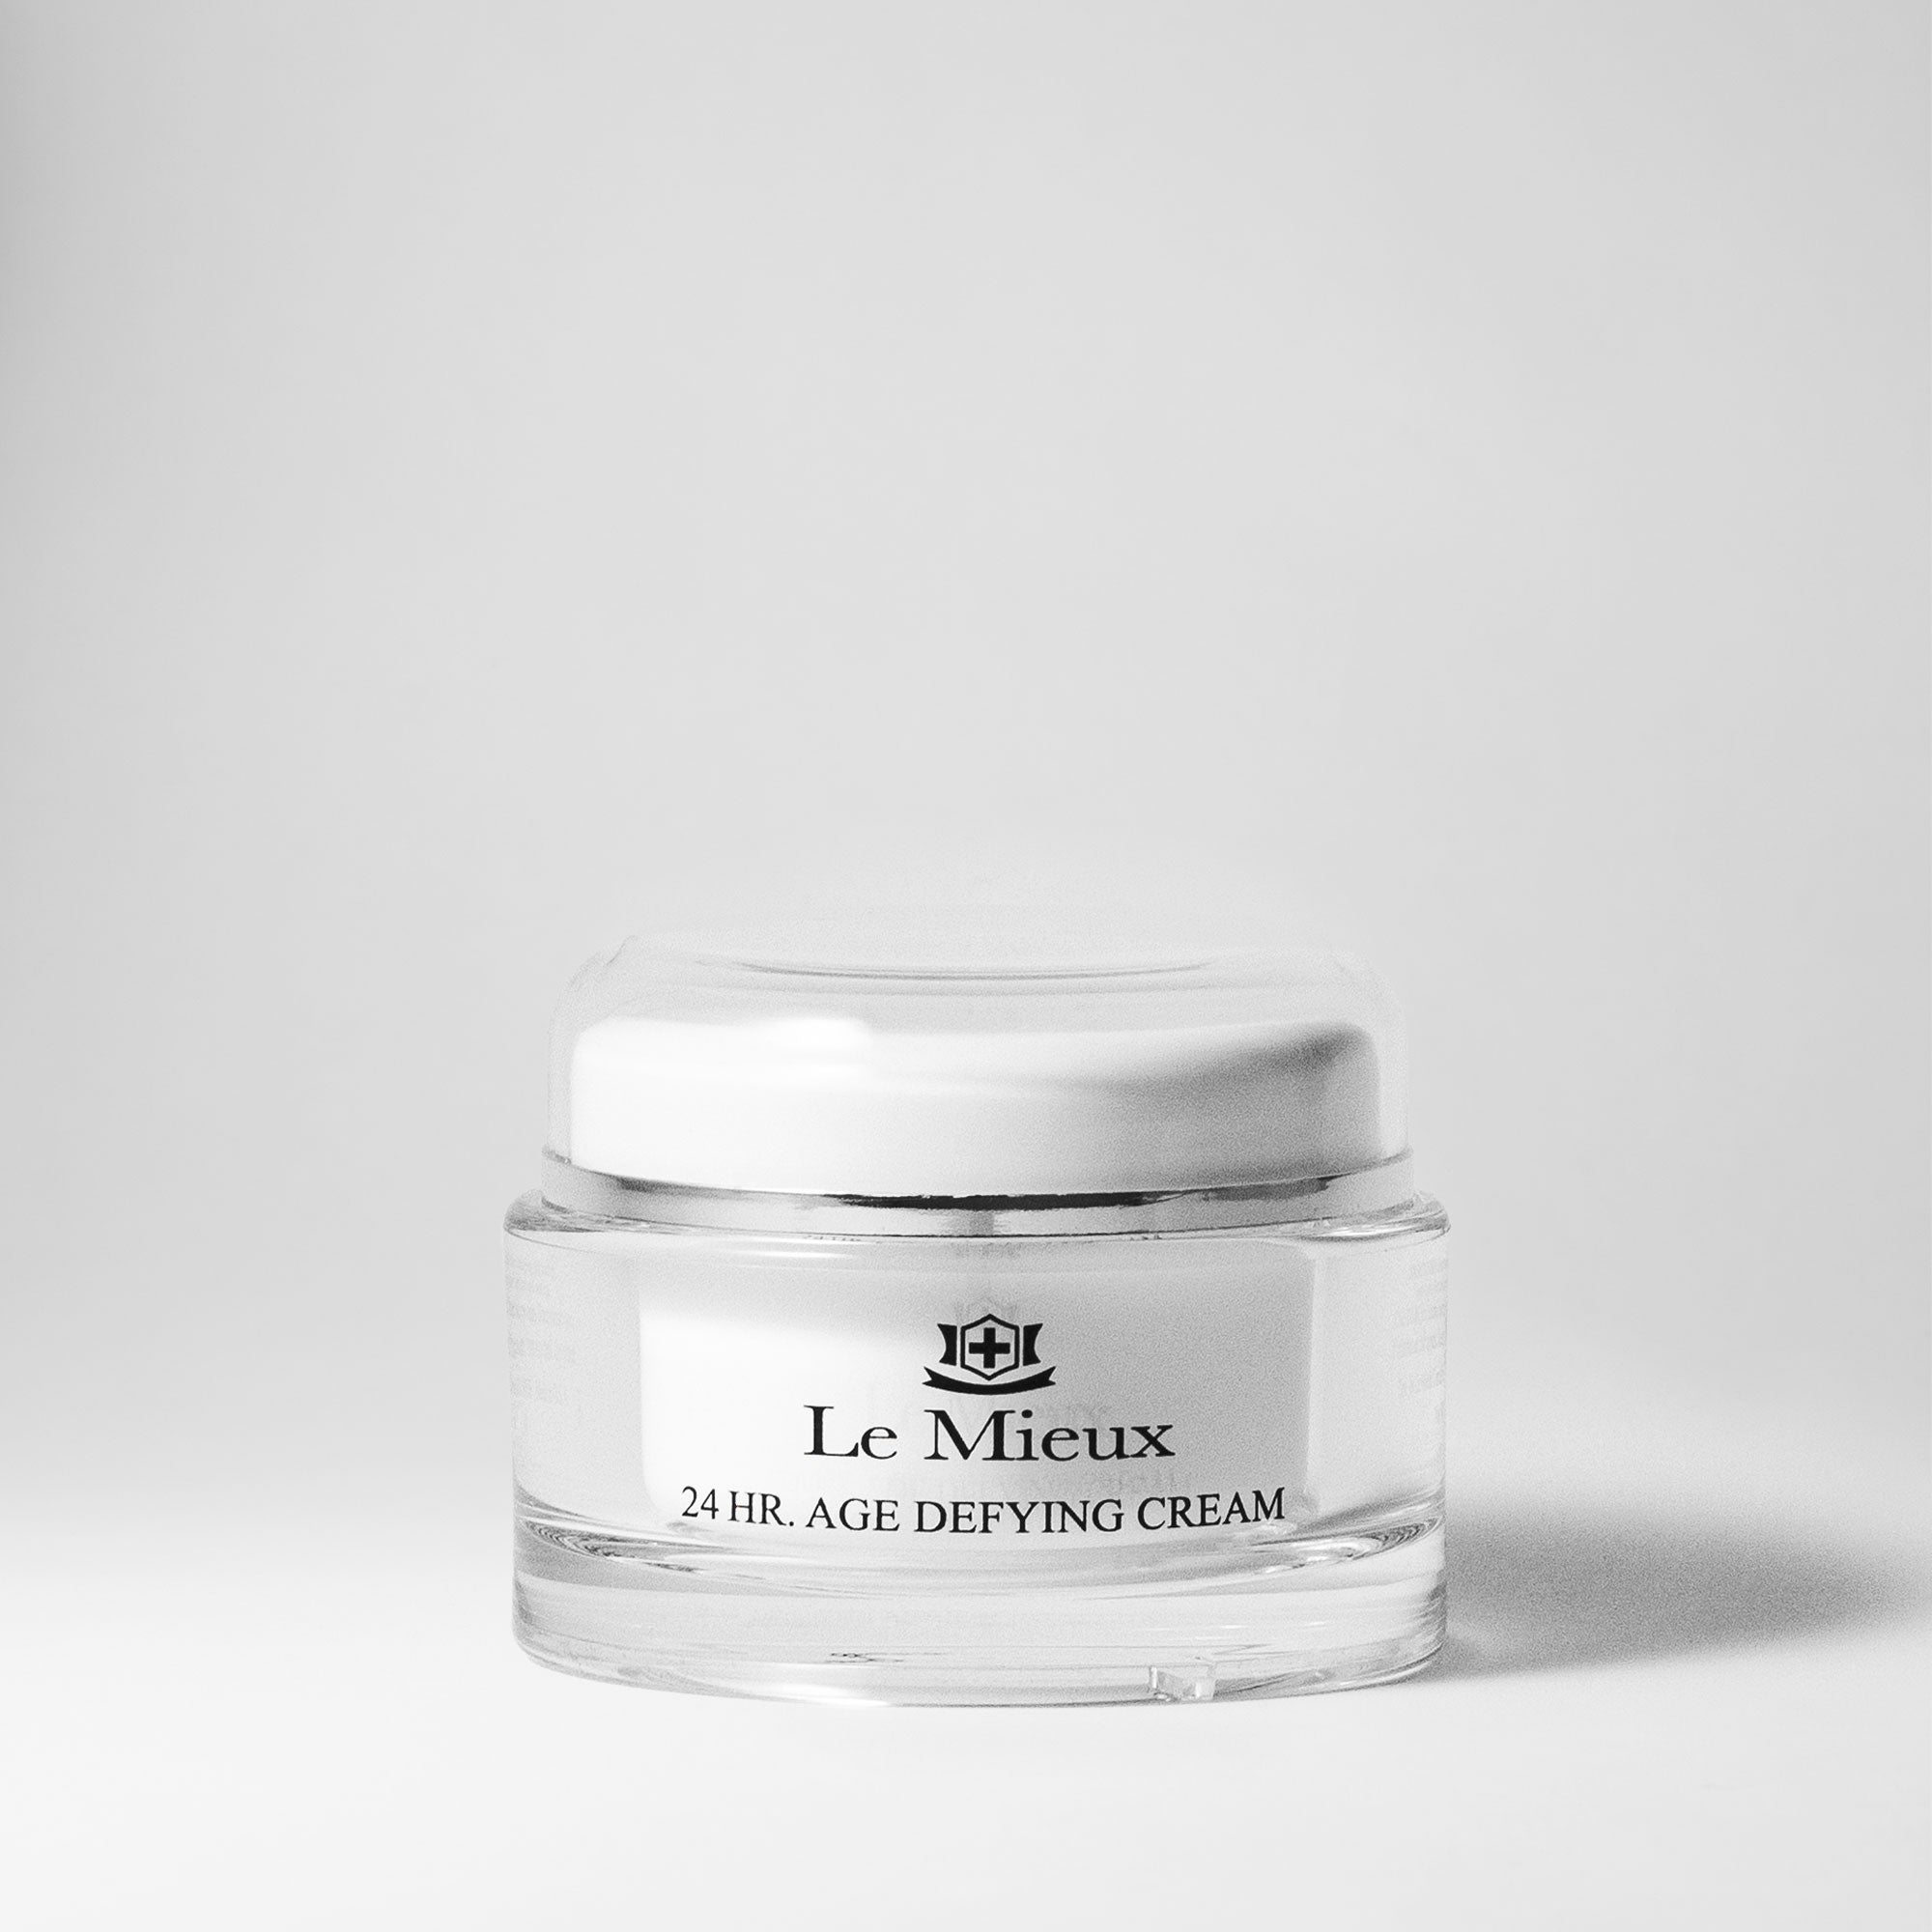  24 HR. AGE DEFYING CREAM from Le Mieux Skincare - featured